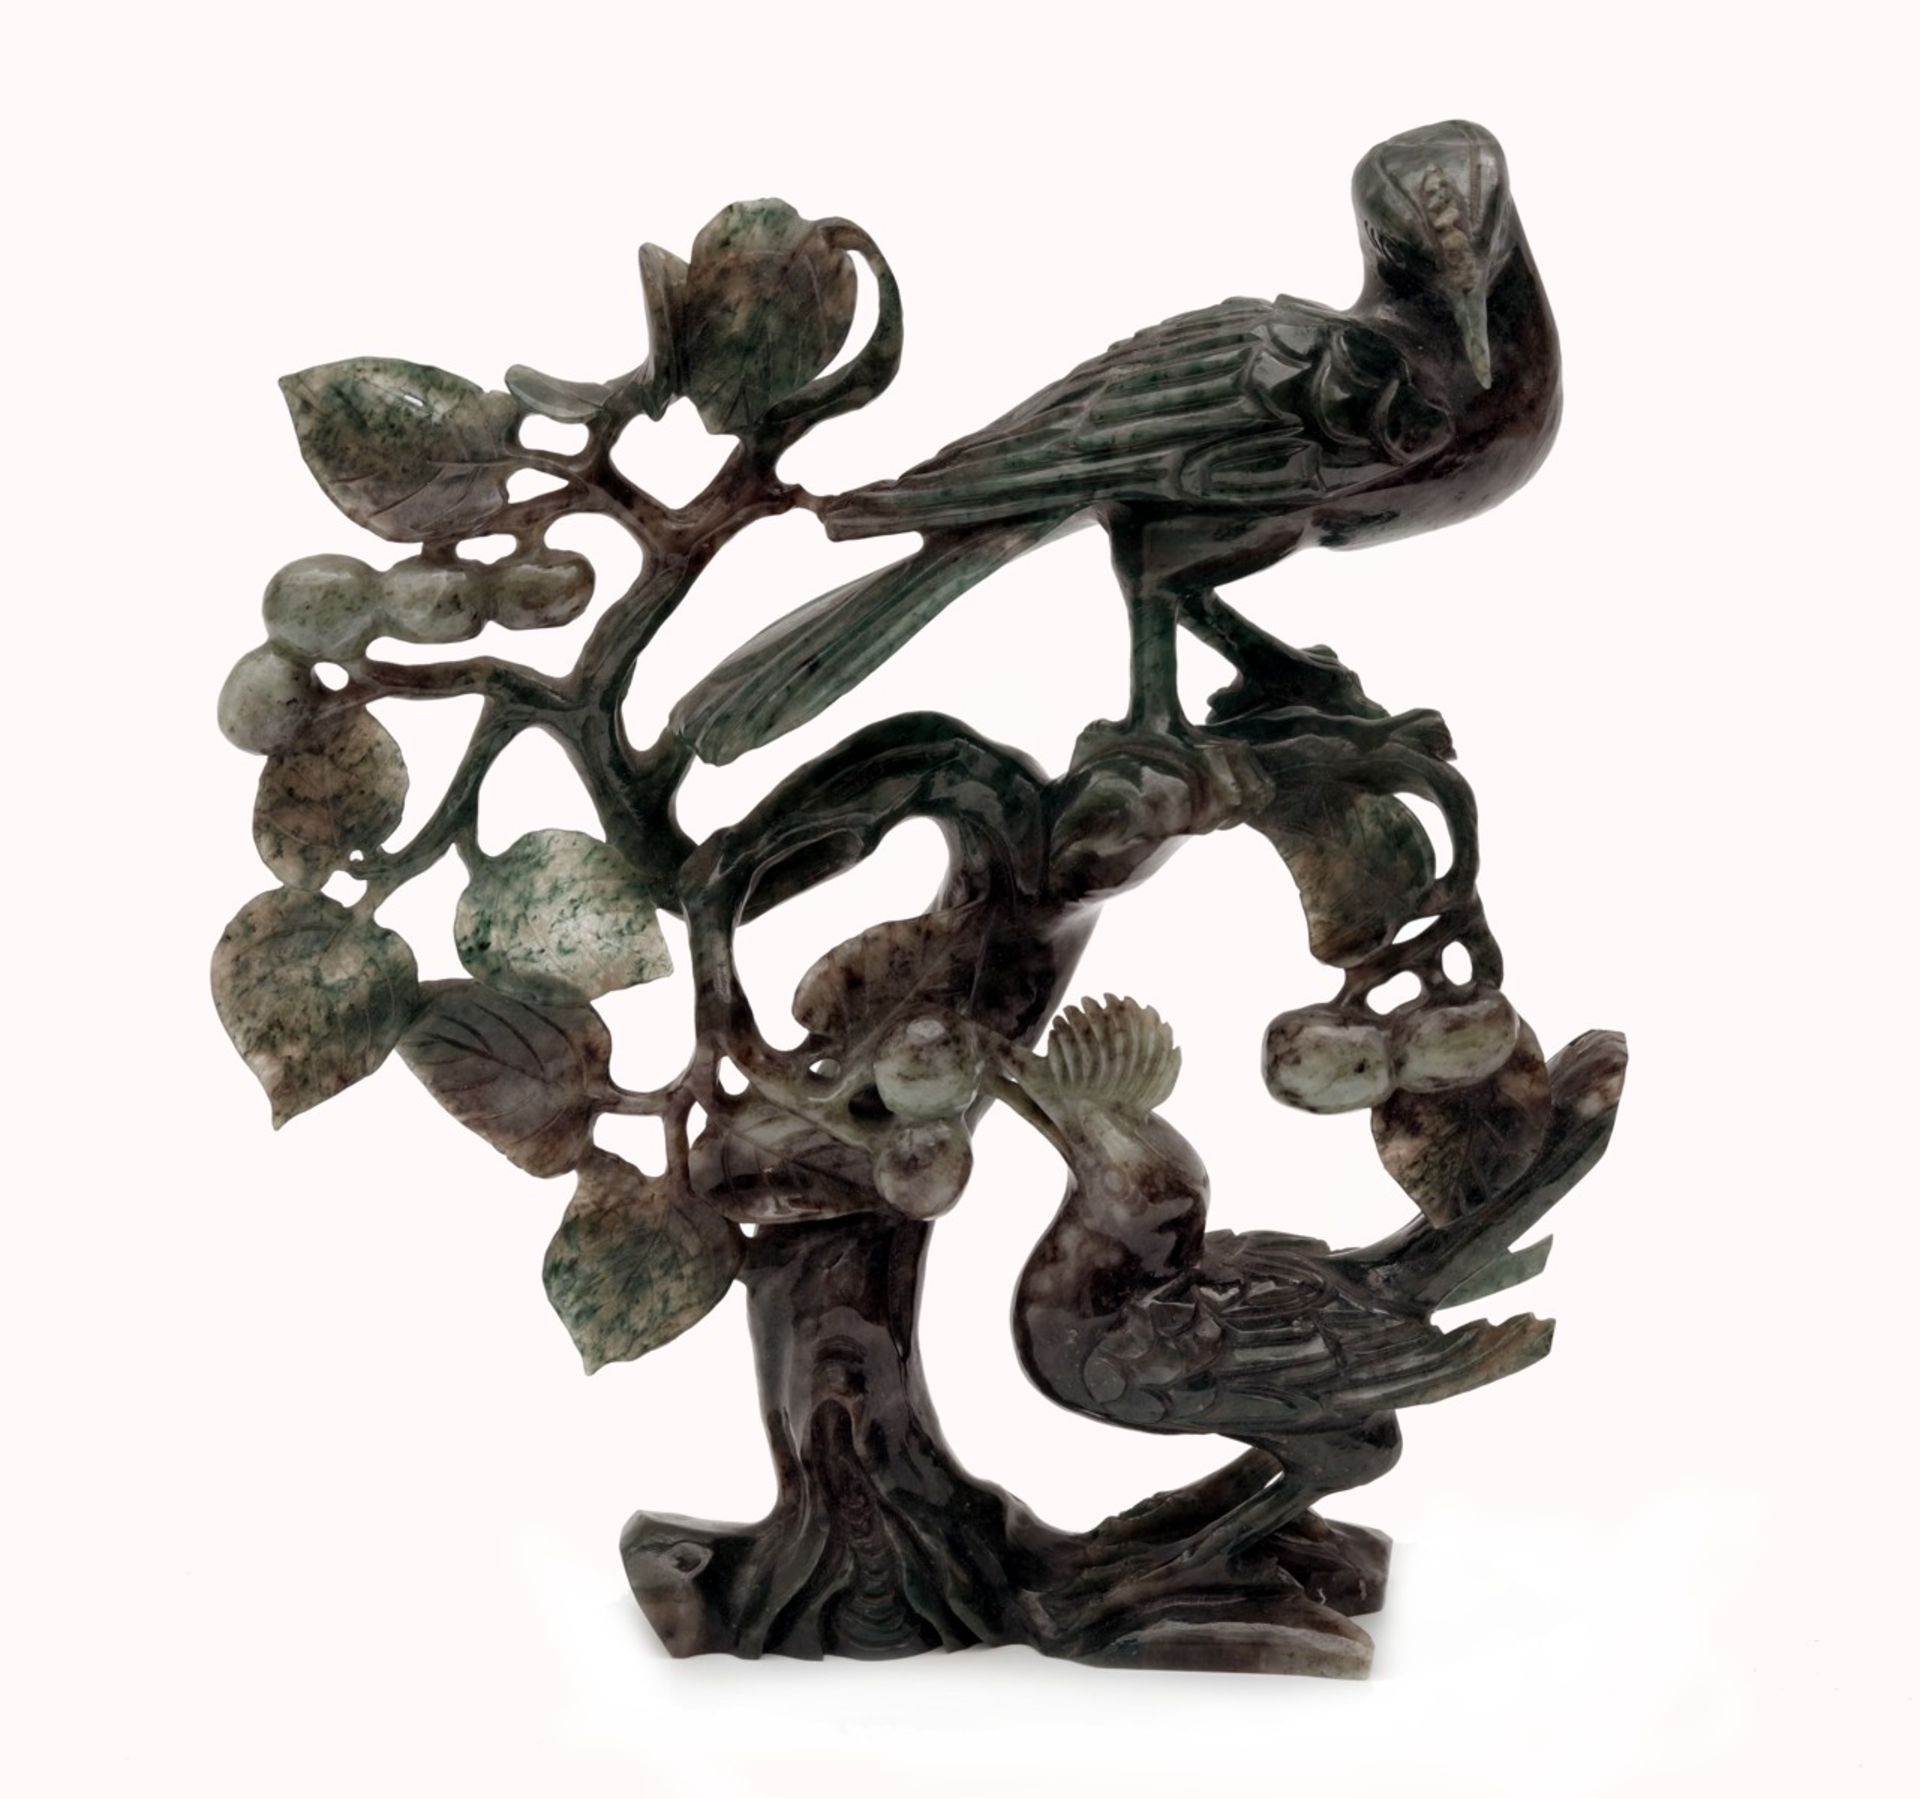 Carved Jade Statue Featuring Birds and Flowers